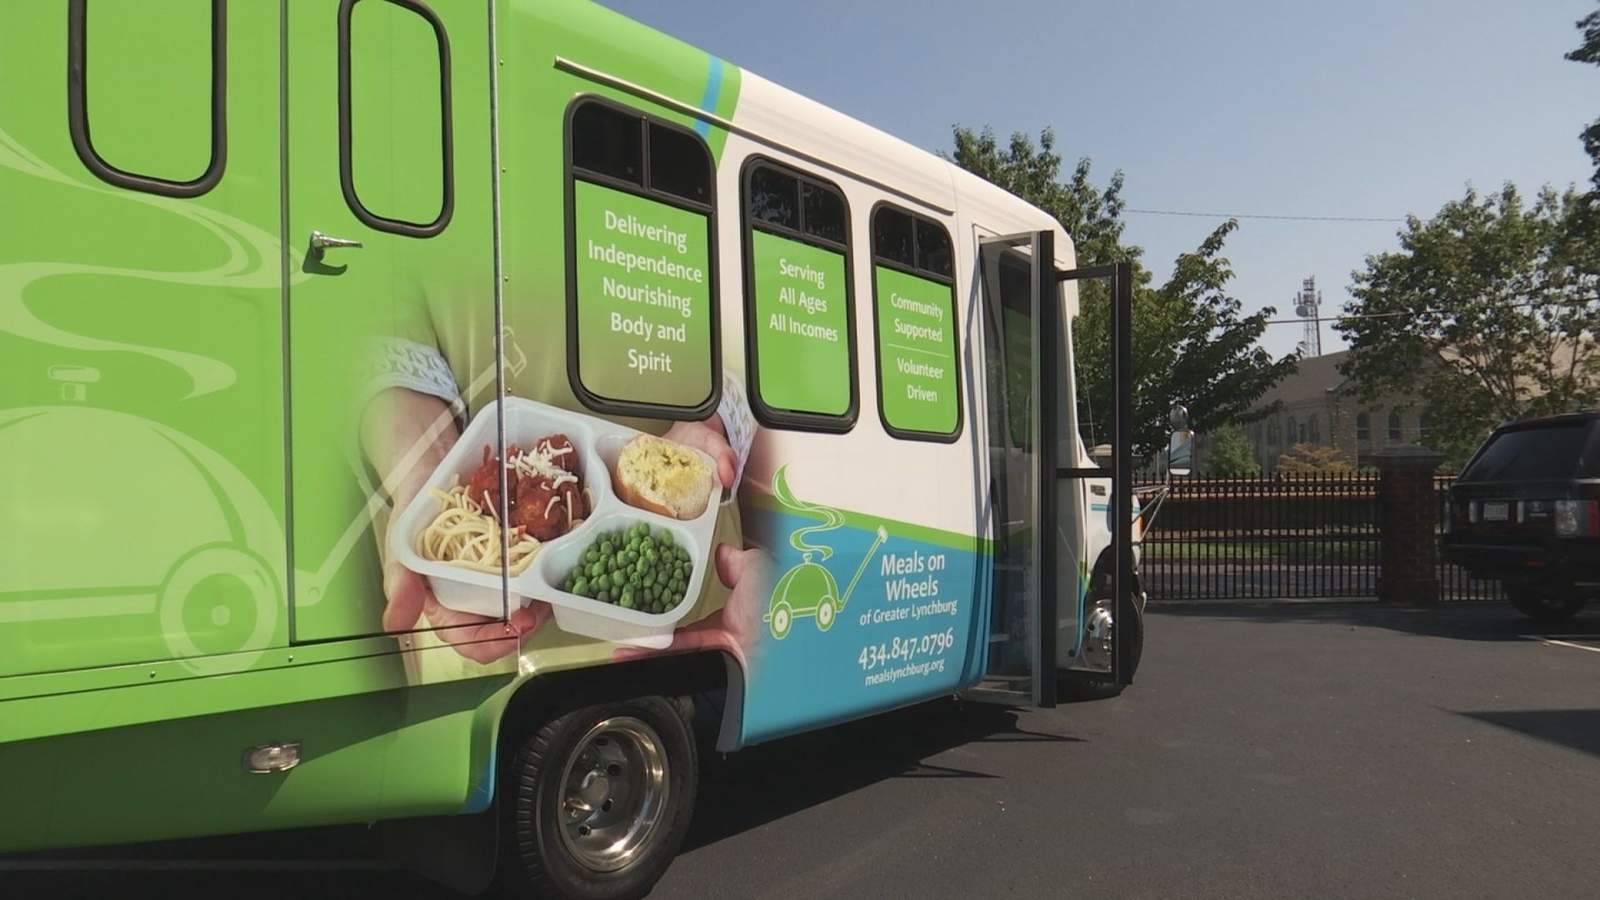 Meals on Wheels of Greater Lynchburg sees major growth during pandemic, gets new bus to deliver food